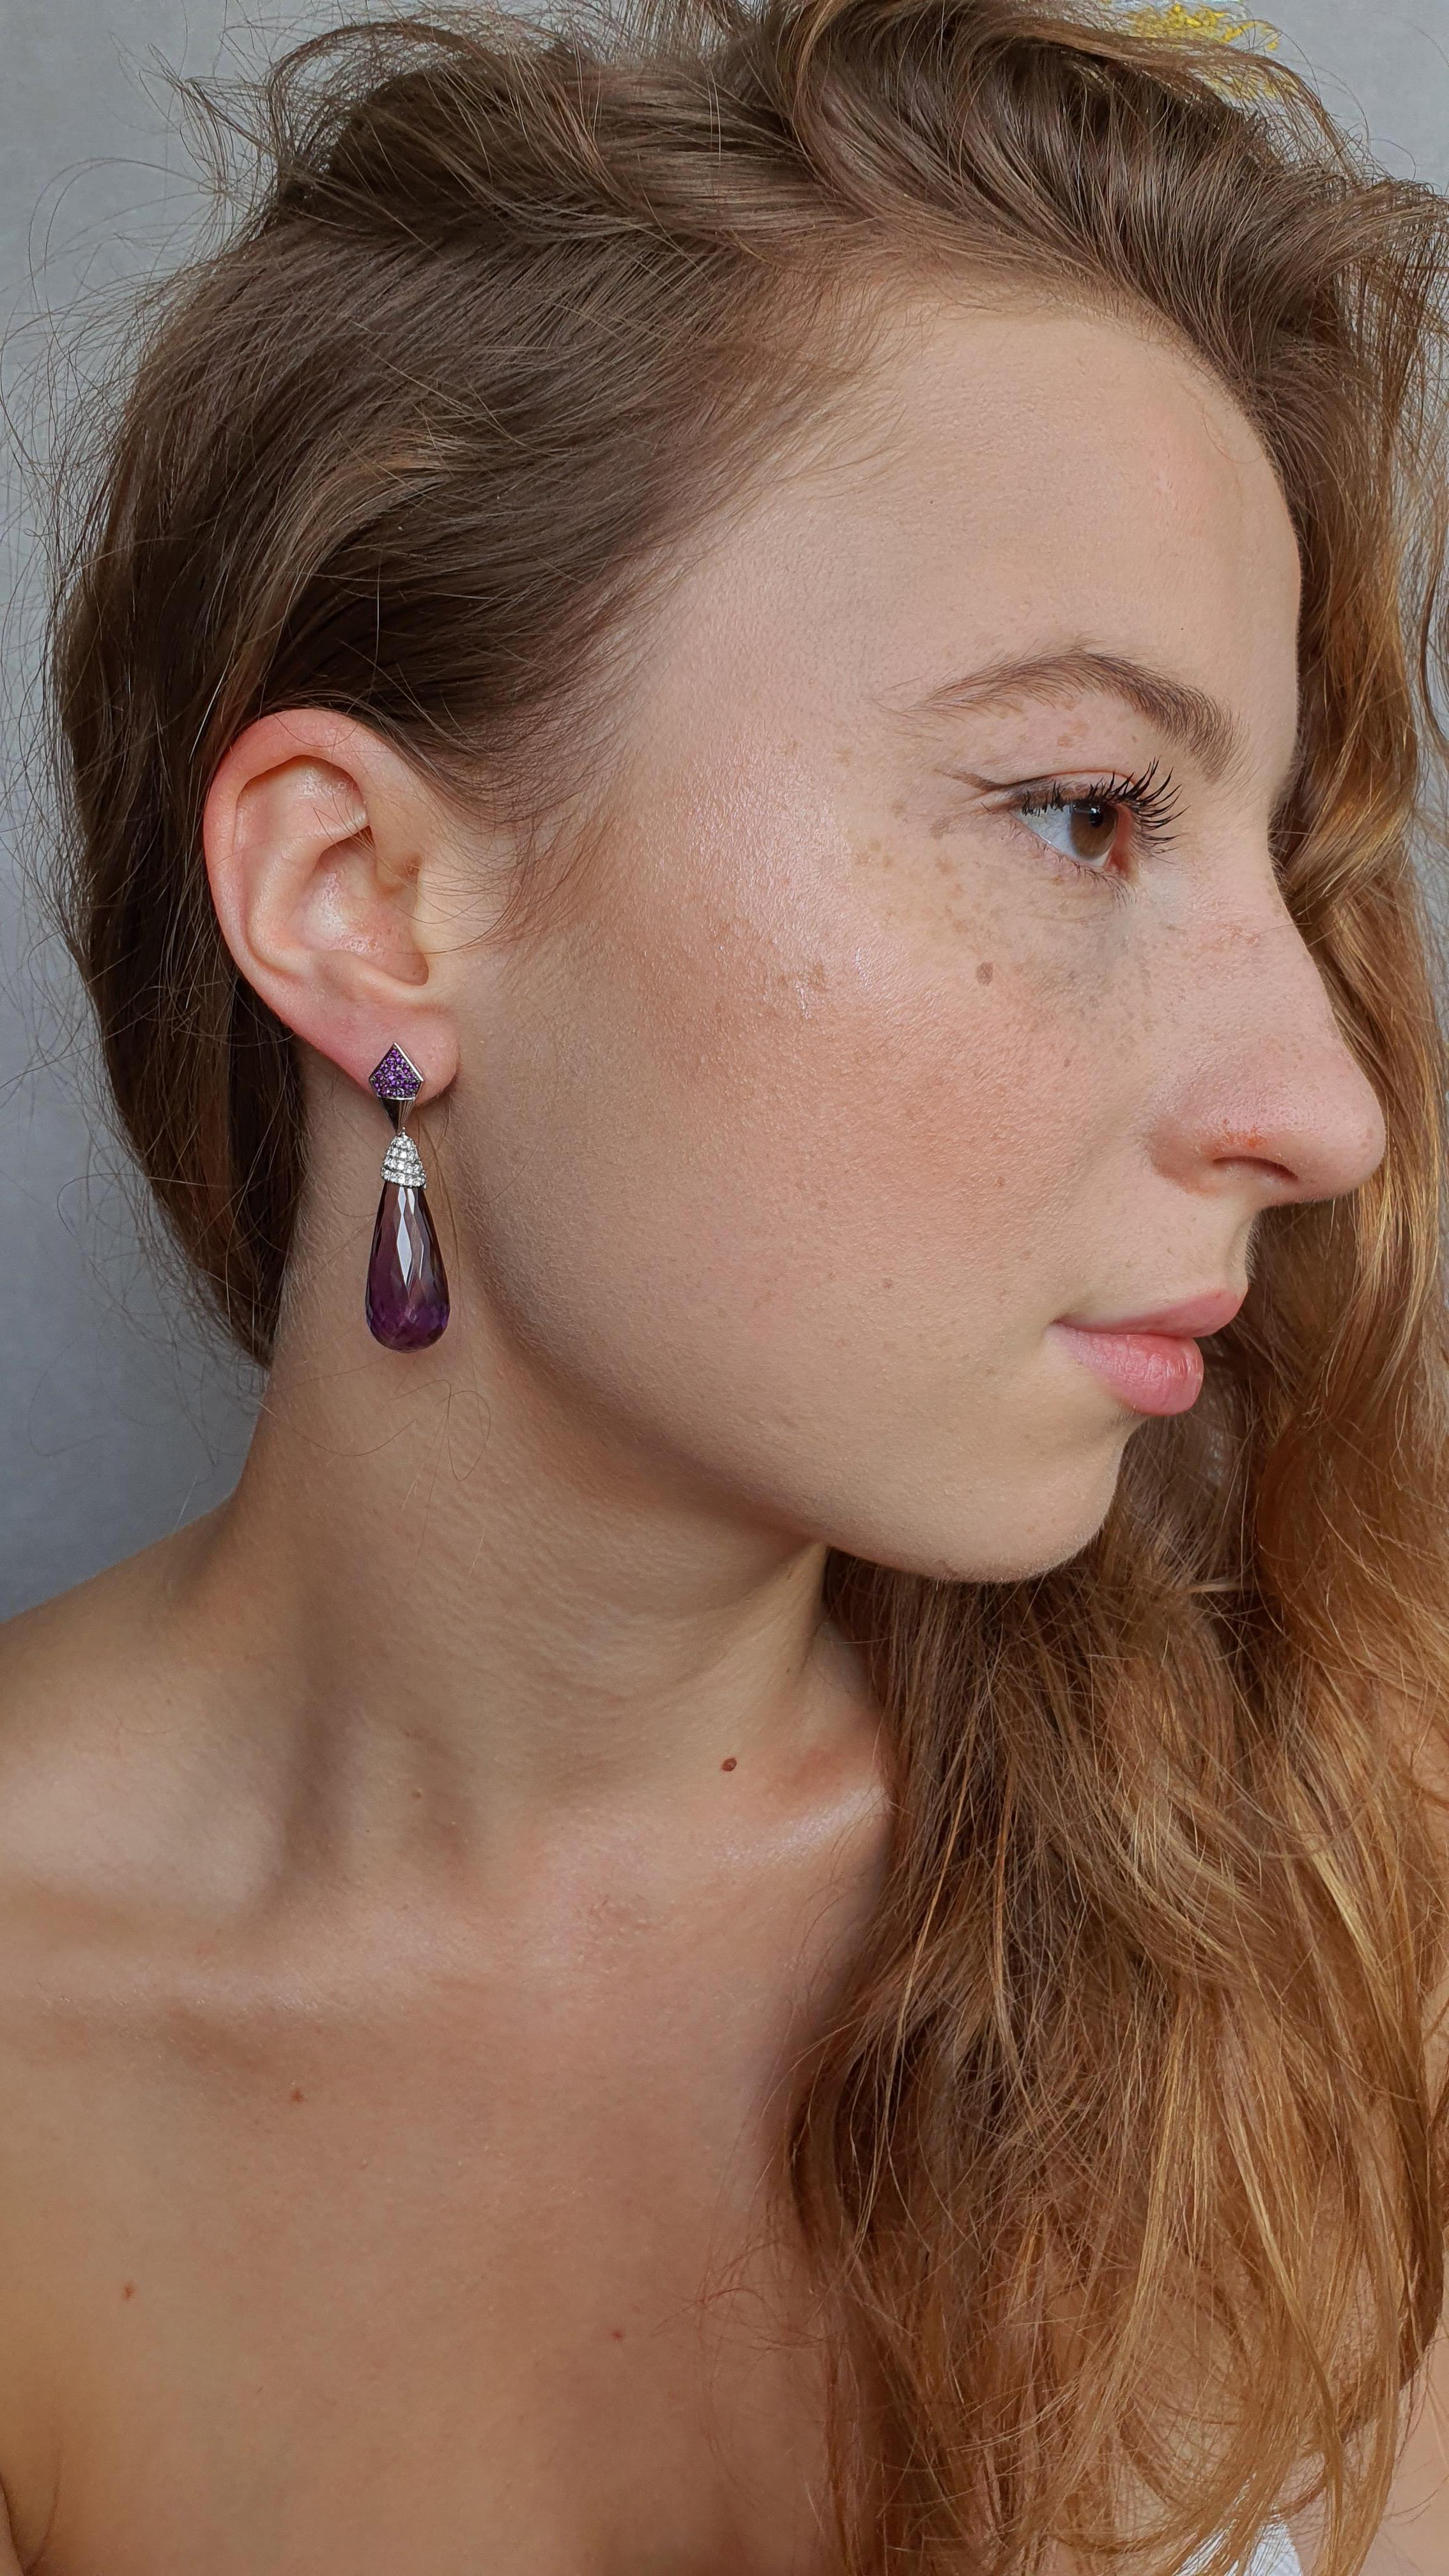 These beautiful earrings feature pampel shaped 42.79 Carat Amethysts and 96 round diamonds. Purple gemstones are often associated with royalty and power  which makes these earrings look more noble. The 18 Karat White Gold here is a perfect base for